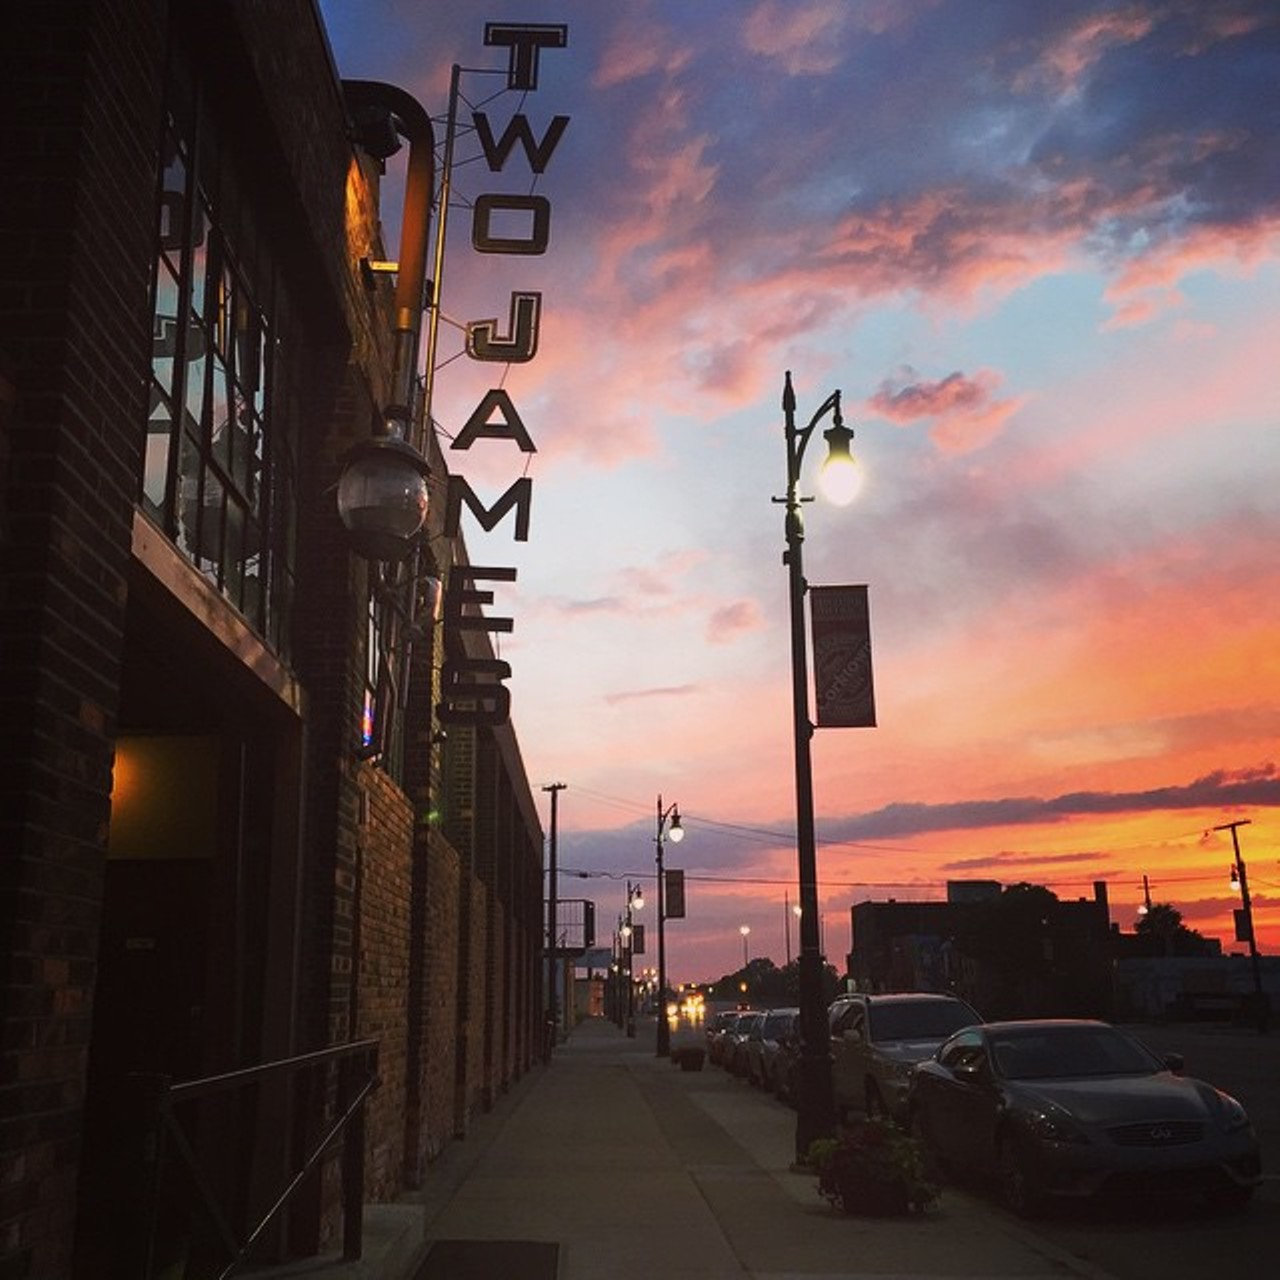 wo James Spirits
2445 Michigan Ave, Detroit
(313)-964-4800
You can spend hours tasting spirits in Two James&#146; tasting room. Just make sure you have an Uber to take you home. 
Photo via IG user @estherphil